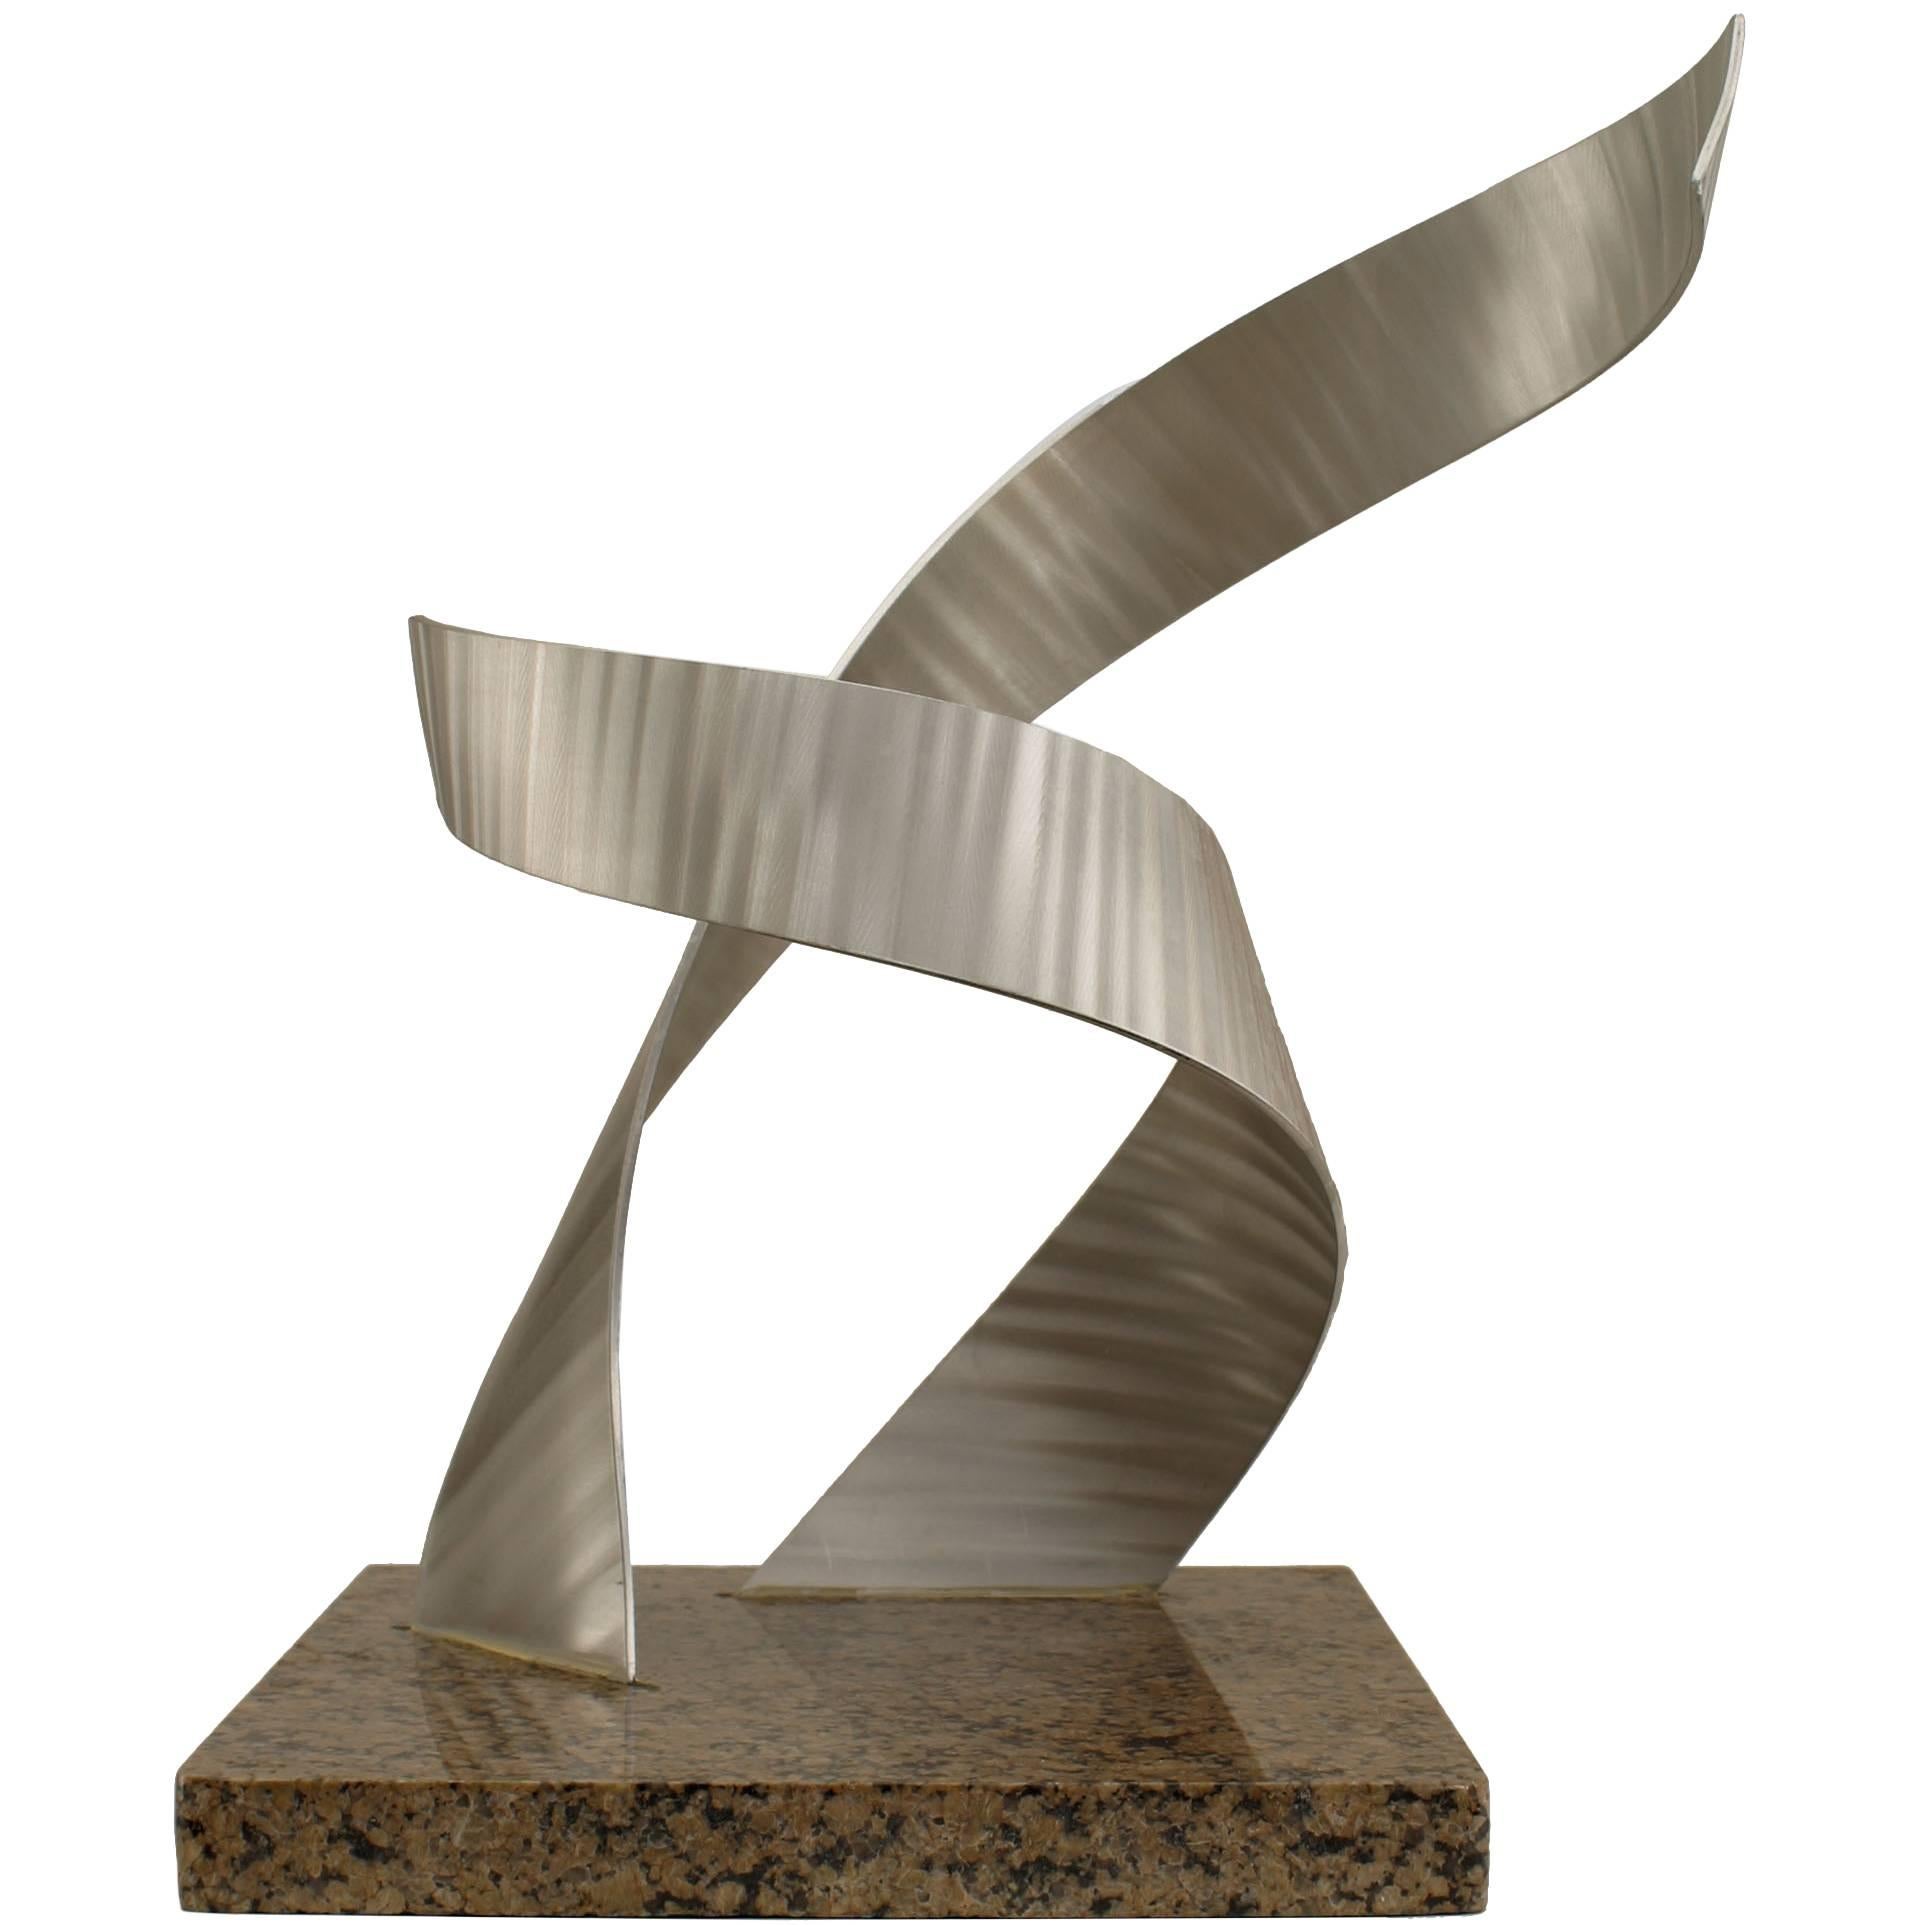 Contemporary American Abstract Aluminum Sculpture